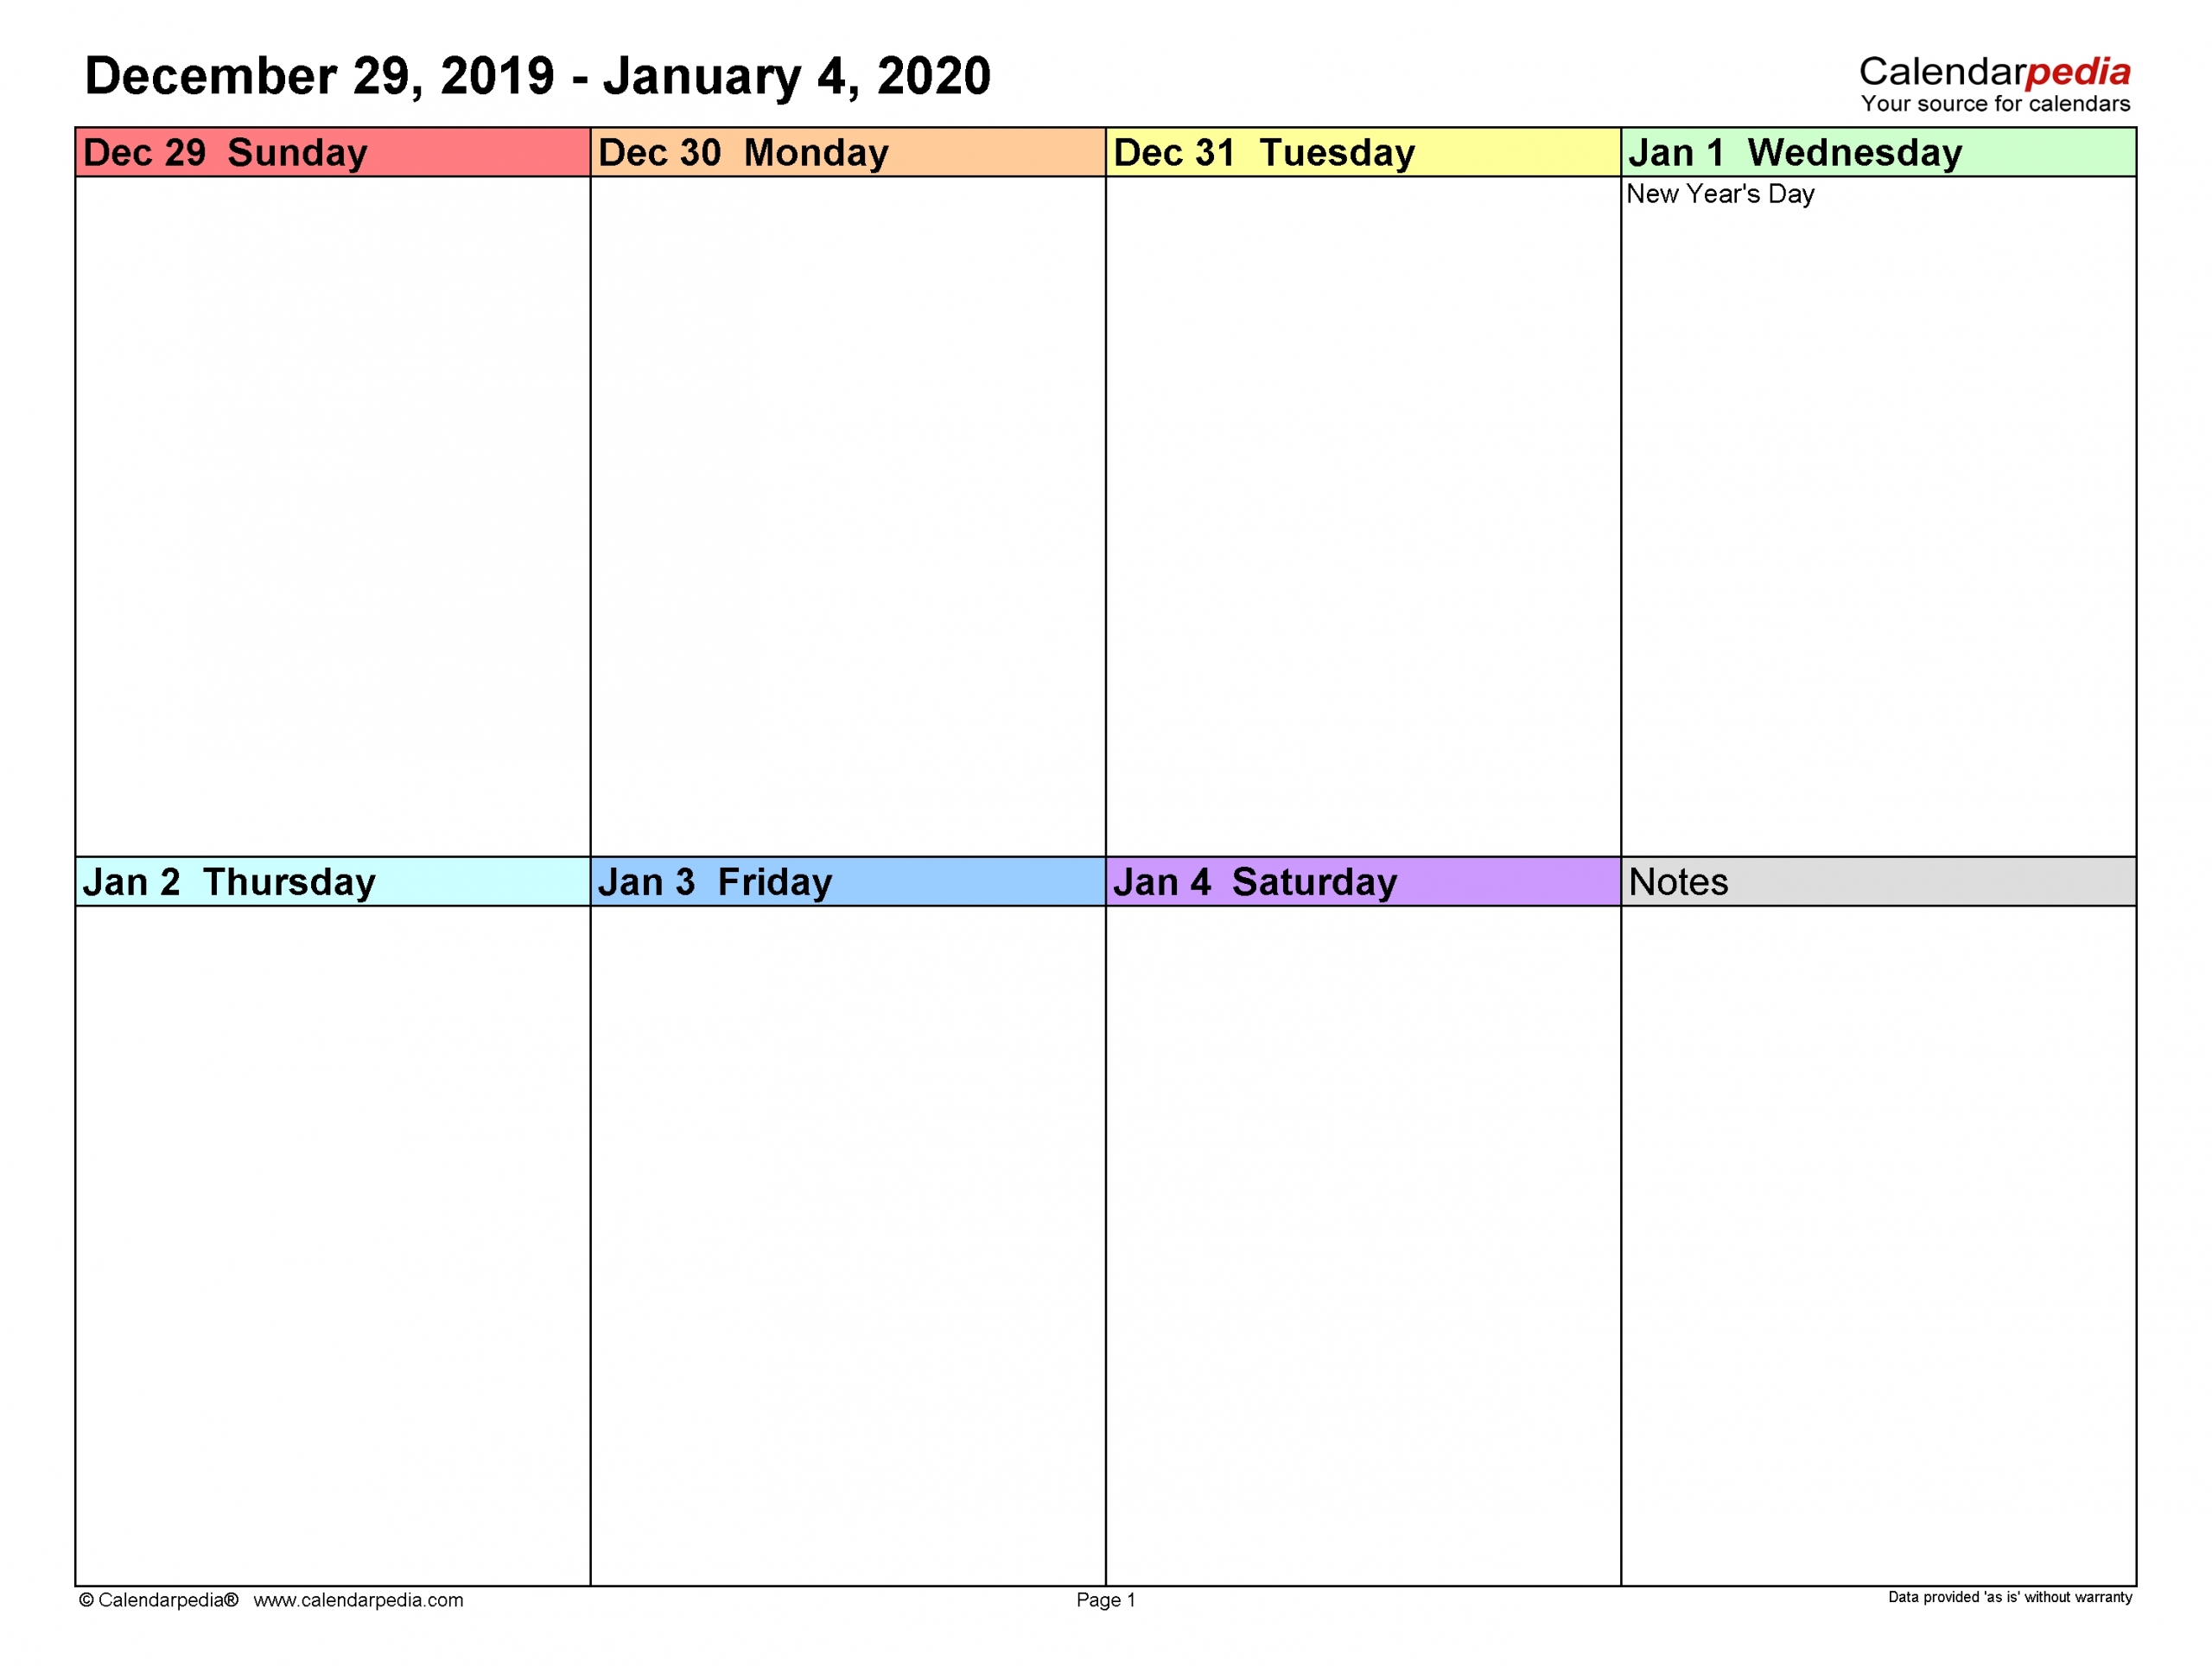 Weekly Calendars 2020 For Word - 12 Free Printable Templates